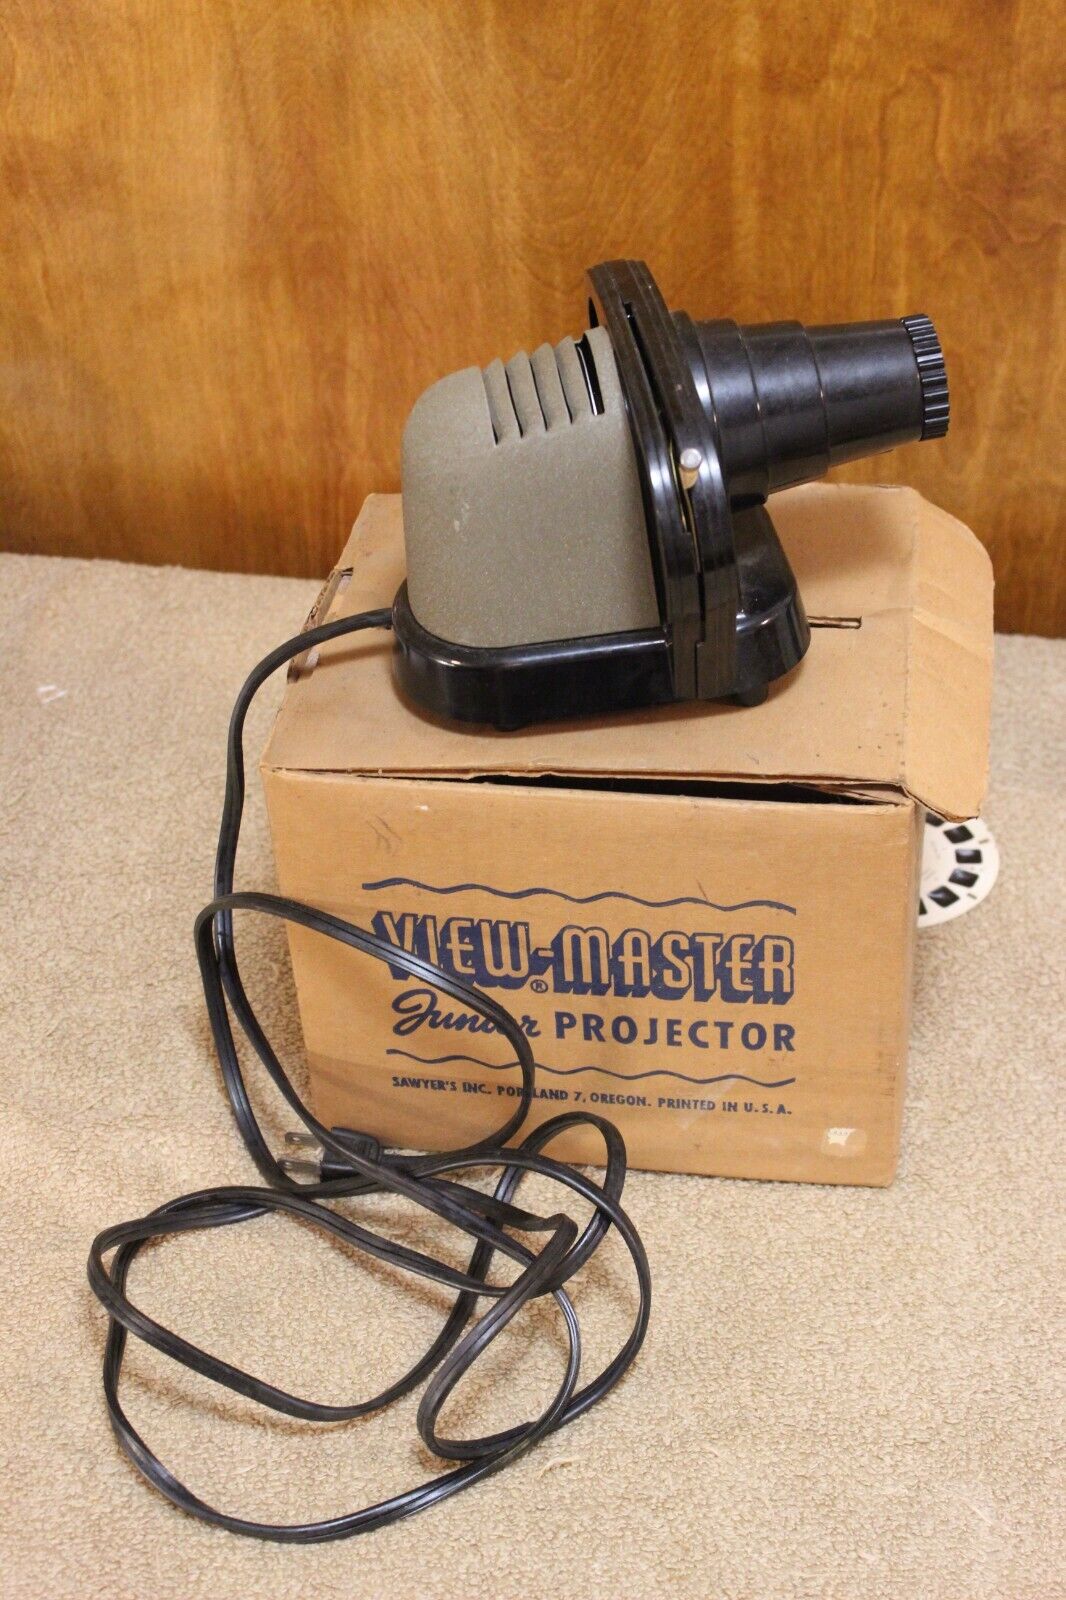 Vintage Sawyer’s View Master Junior Projector w/original box 1950s Tested Works